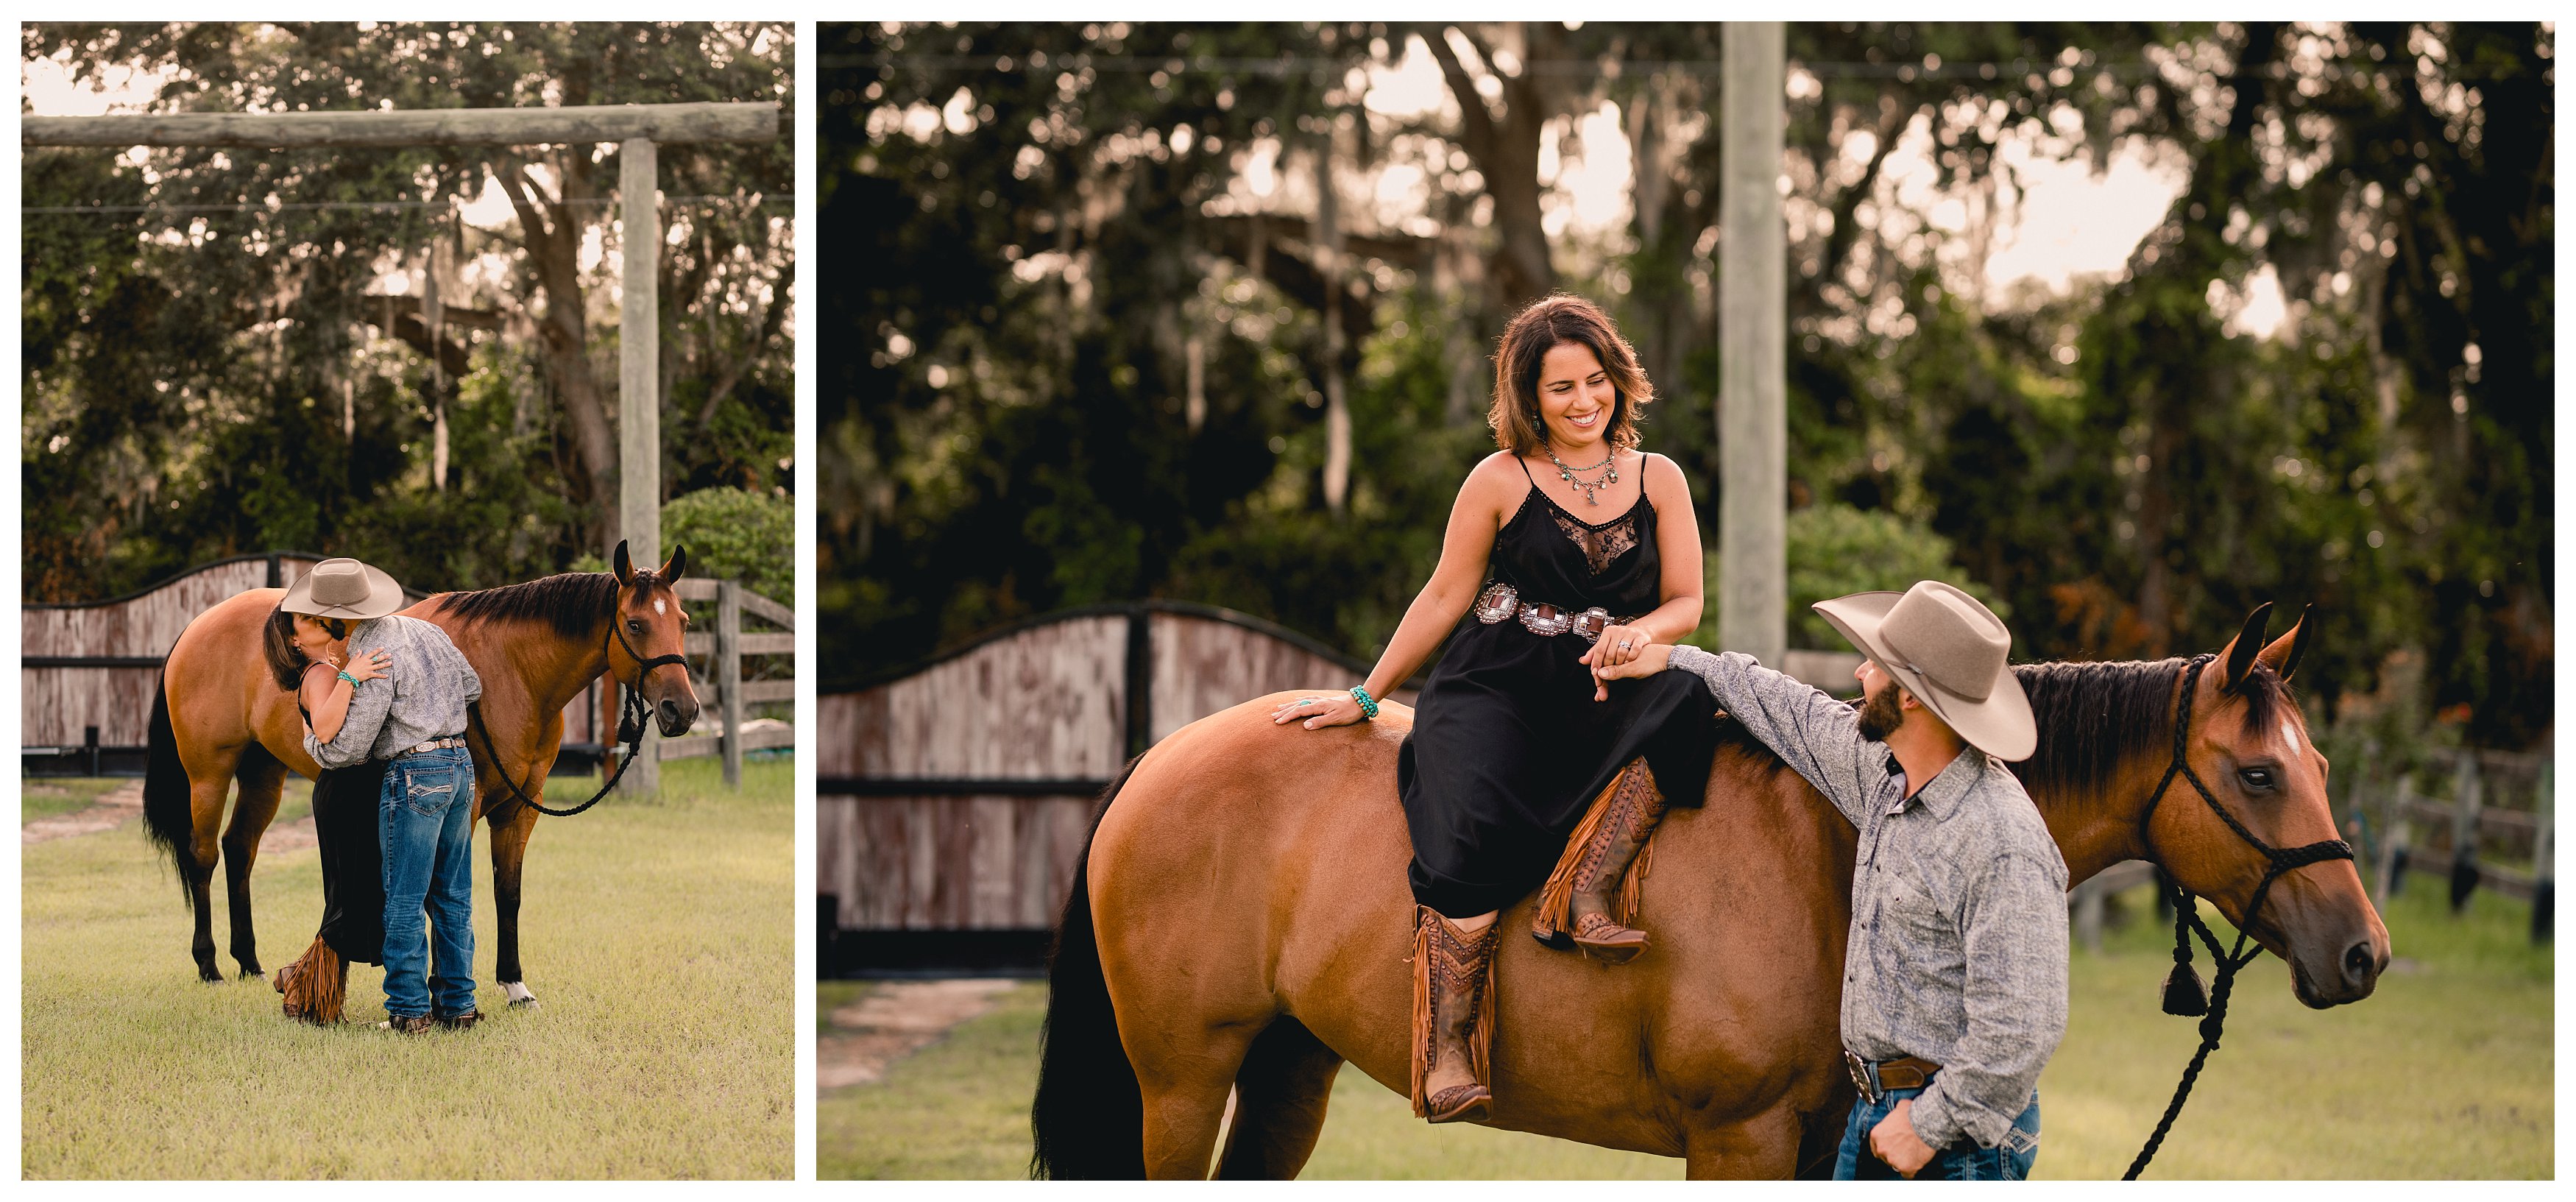 Beautifully lit couples photos with their horse in Gainesville, FL.